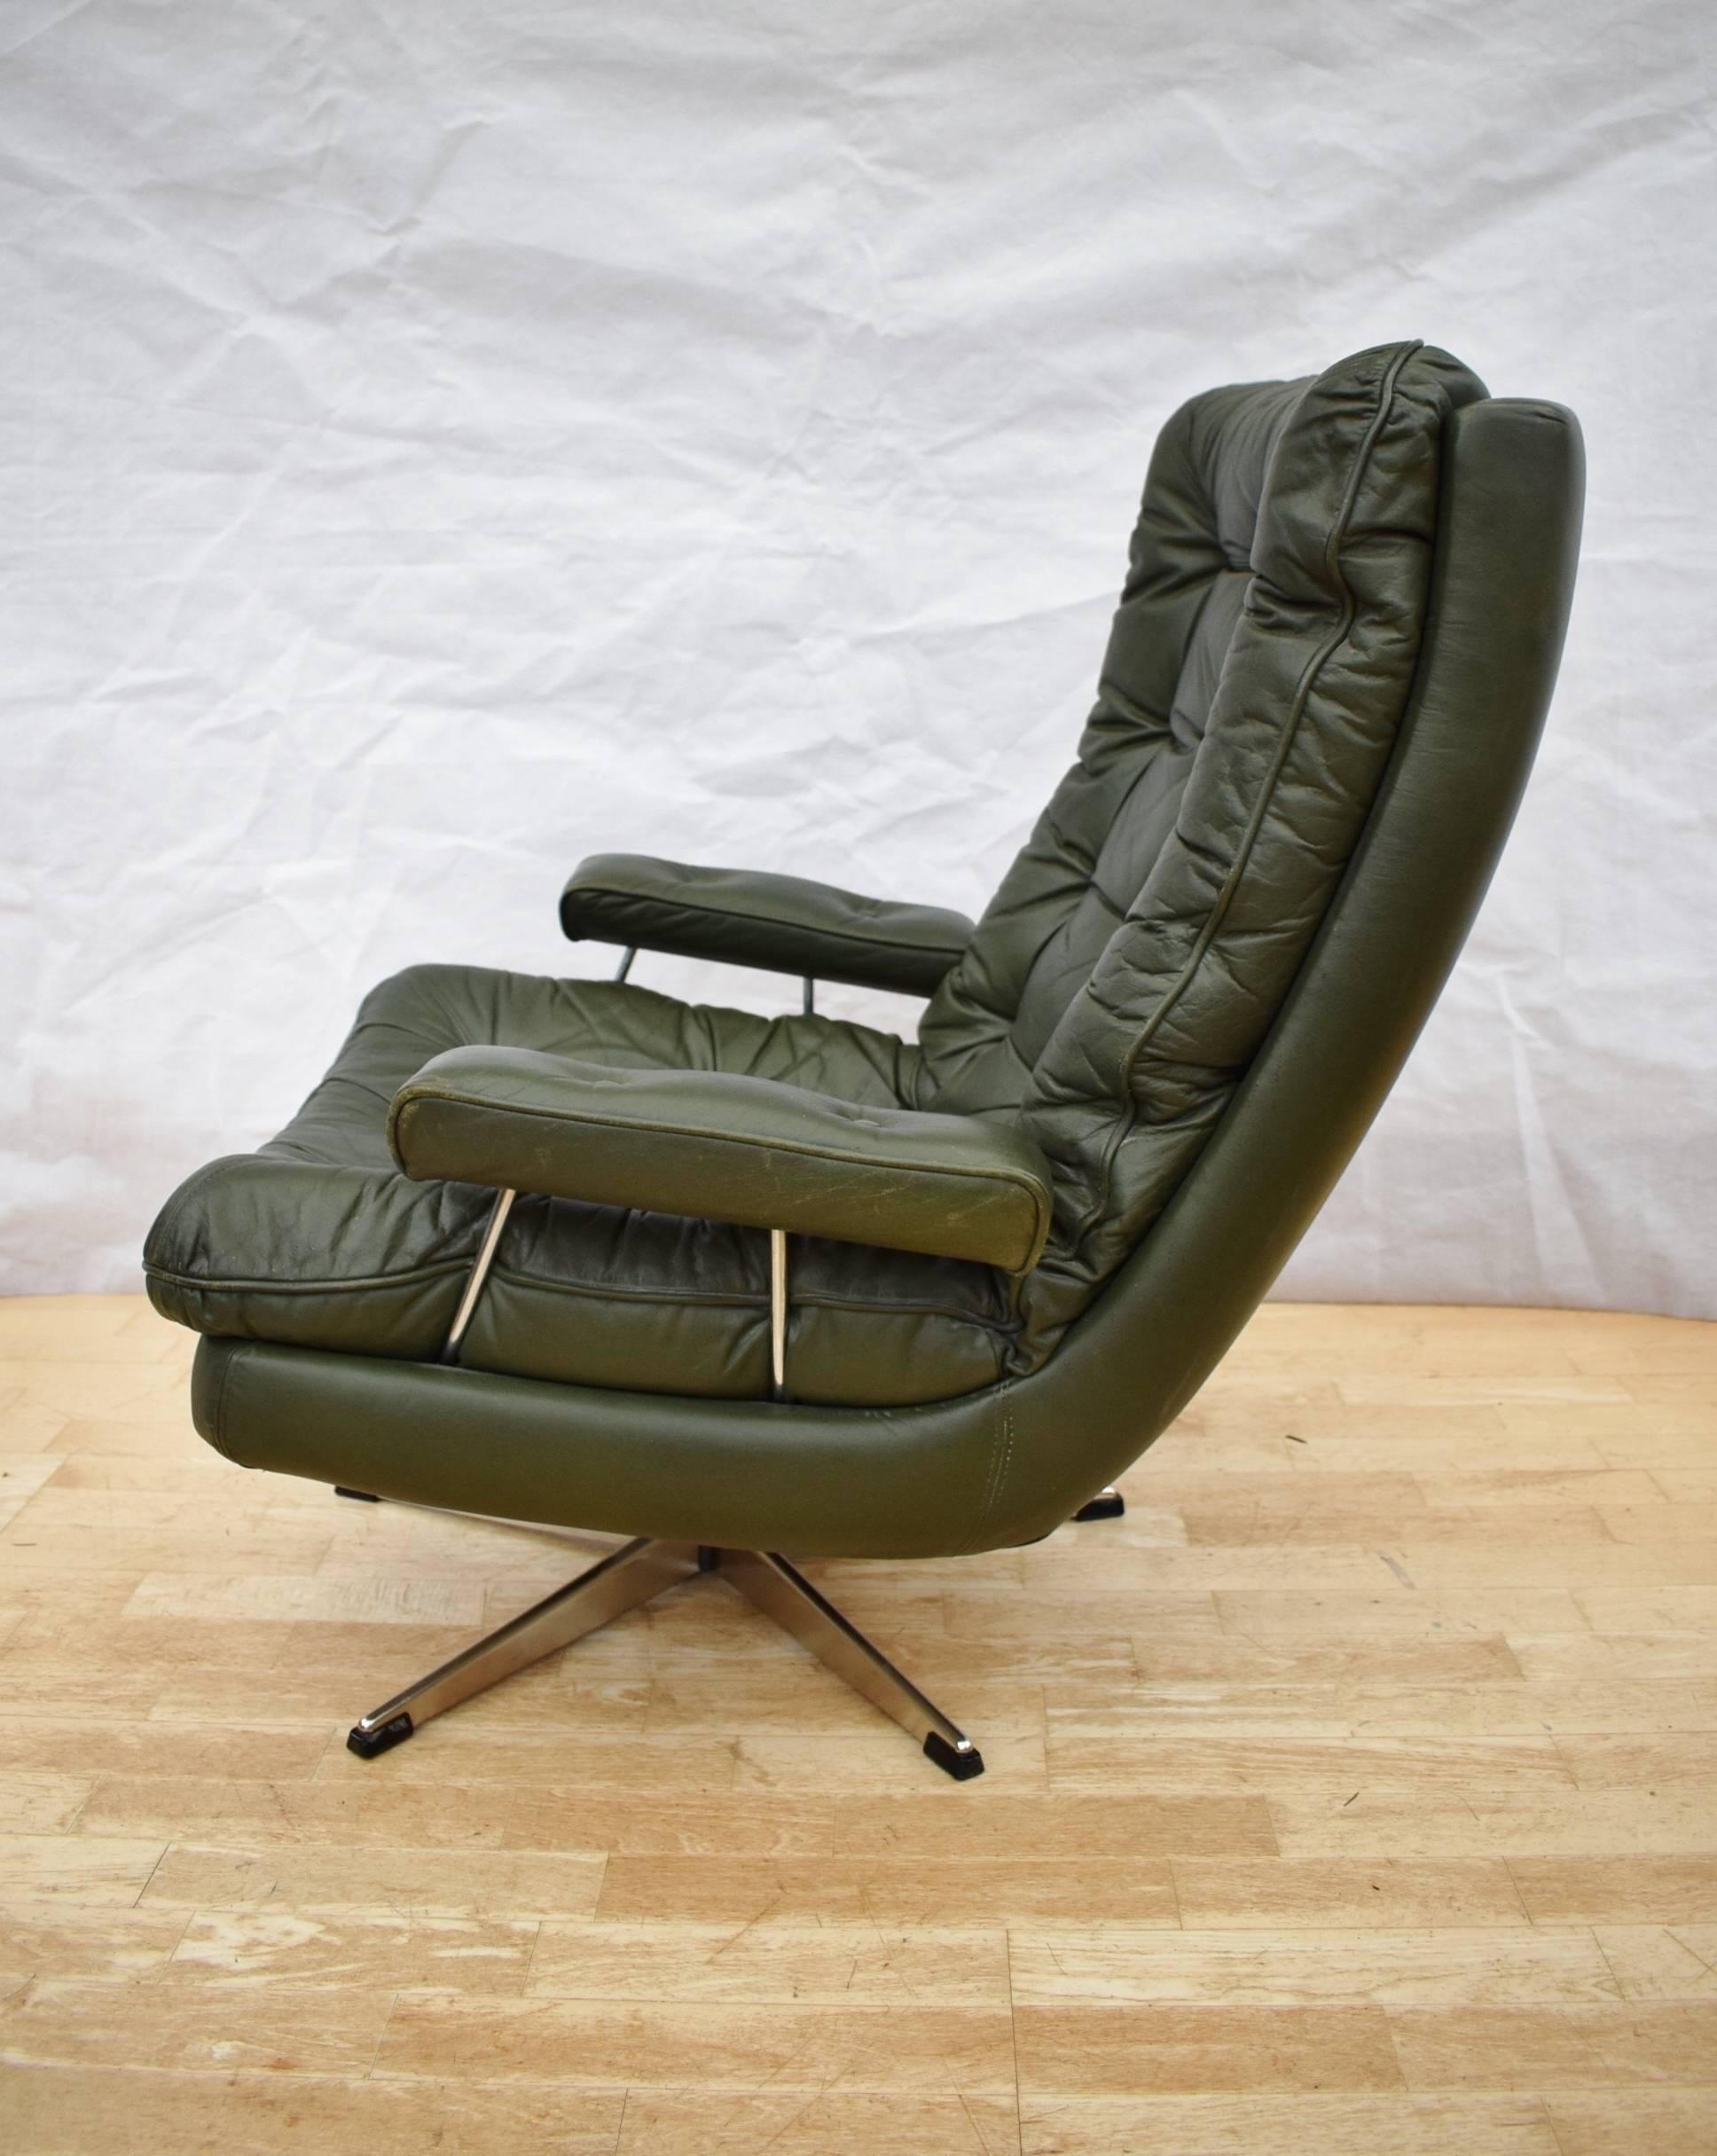 Designer: Danish Design.

Manufacturer: Unknown.

Country: Denmark.

Date: 1970s.

Material: Genuine Green leather upholstery with metal swivel base.

Maximum Dimensions: Width 77cm, depth 90cm, height 90cm and seat height